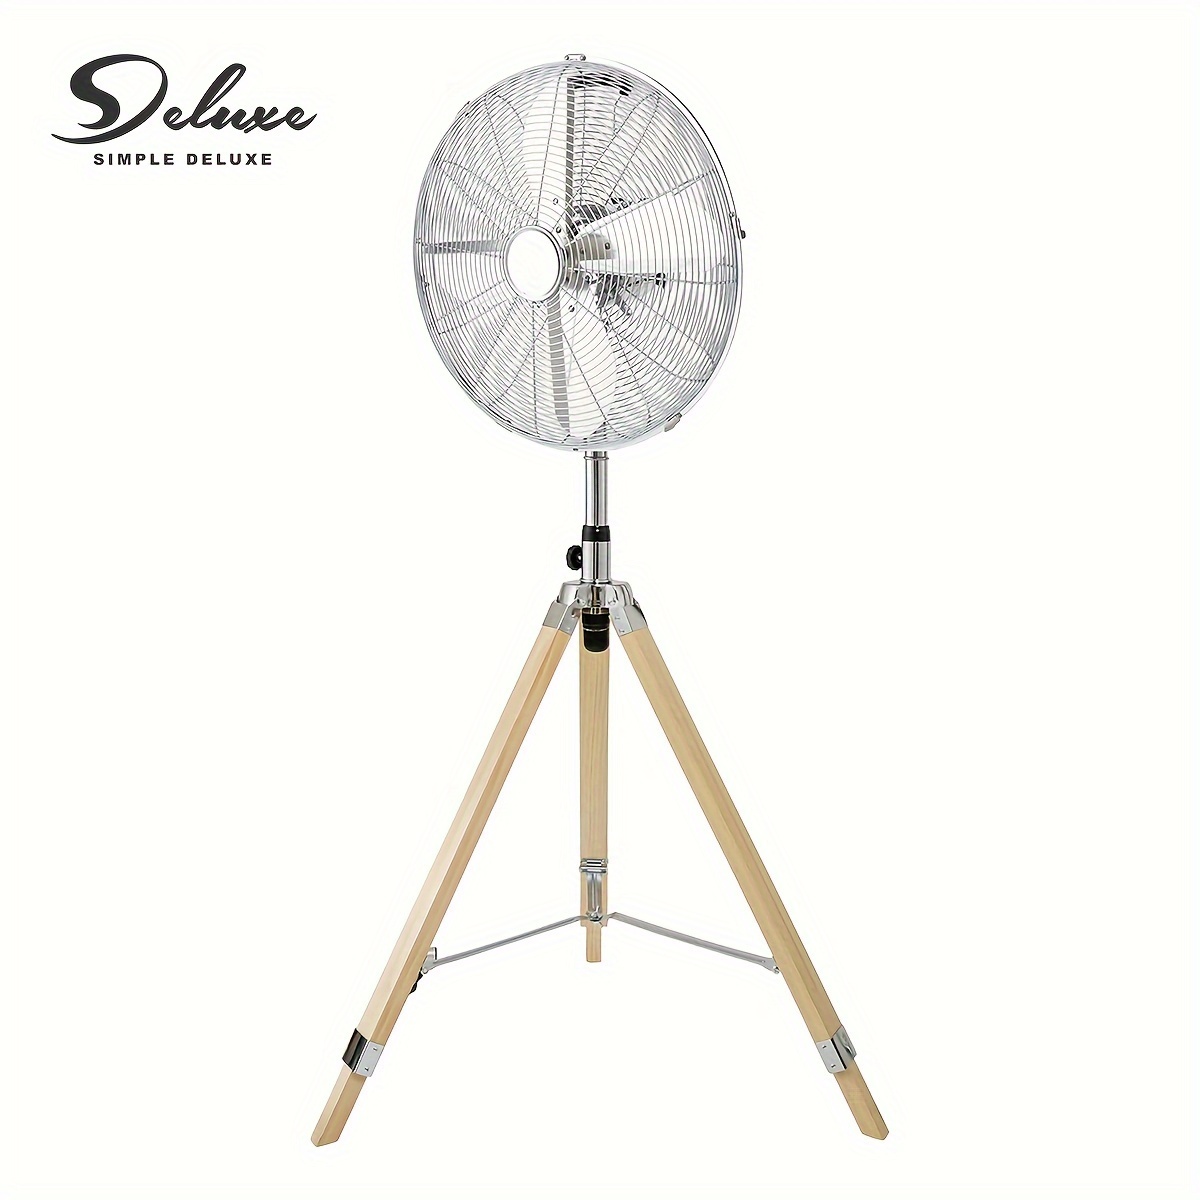 

Simpledeluxe Retro Tripod Fan, Home Air Circulation Nostalgic Vertical Fan, 3 Speeds, Adjustable Height, Silver-16 Inch, 16 Inch